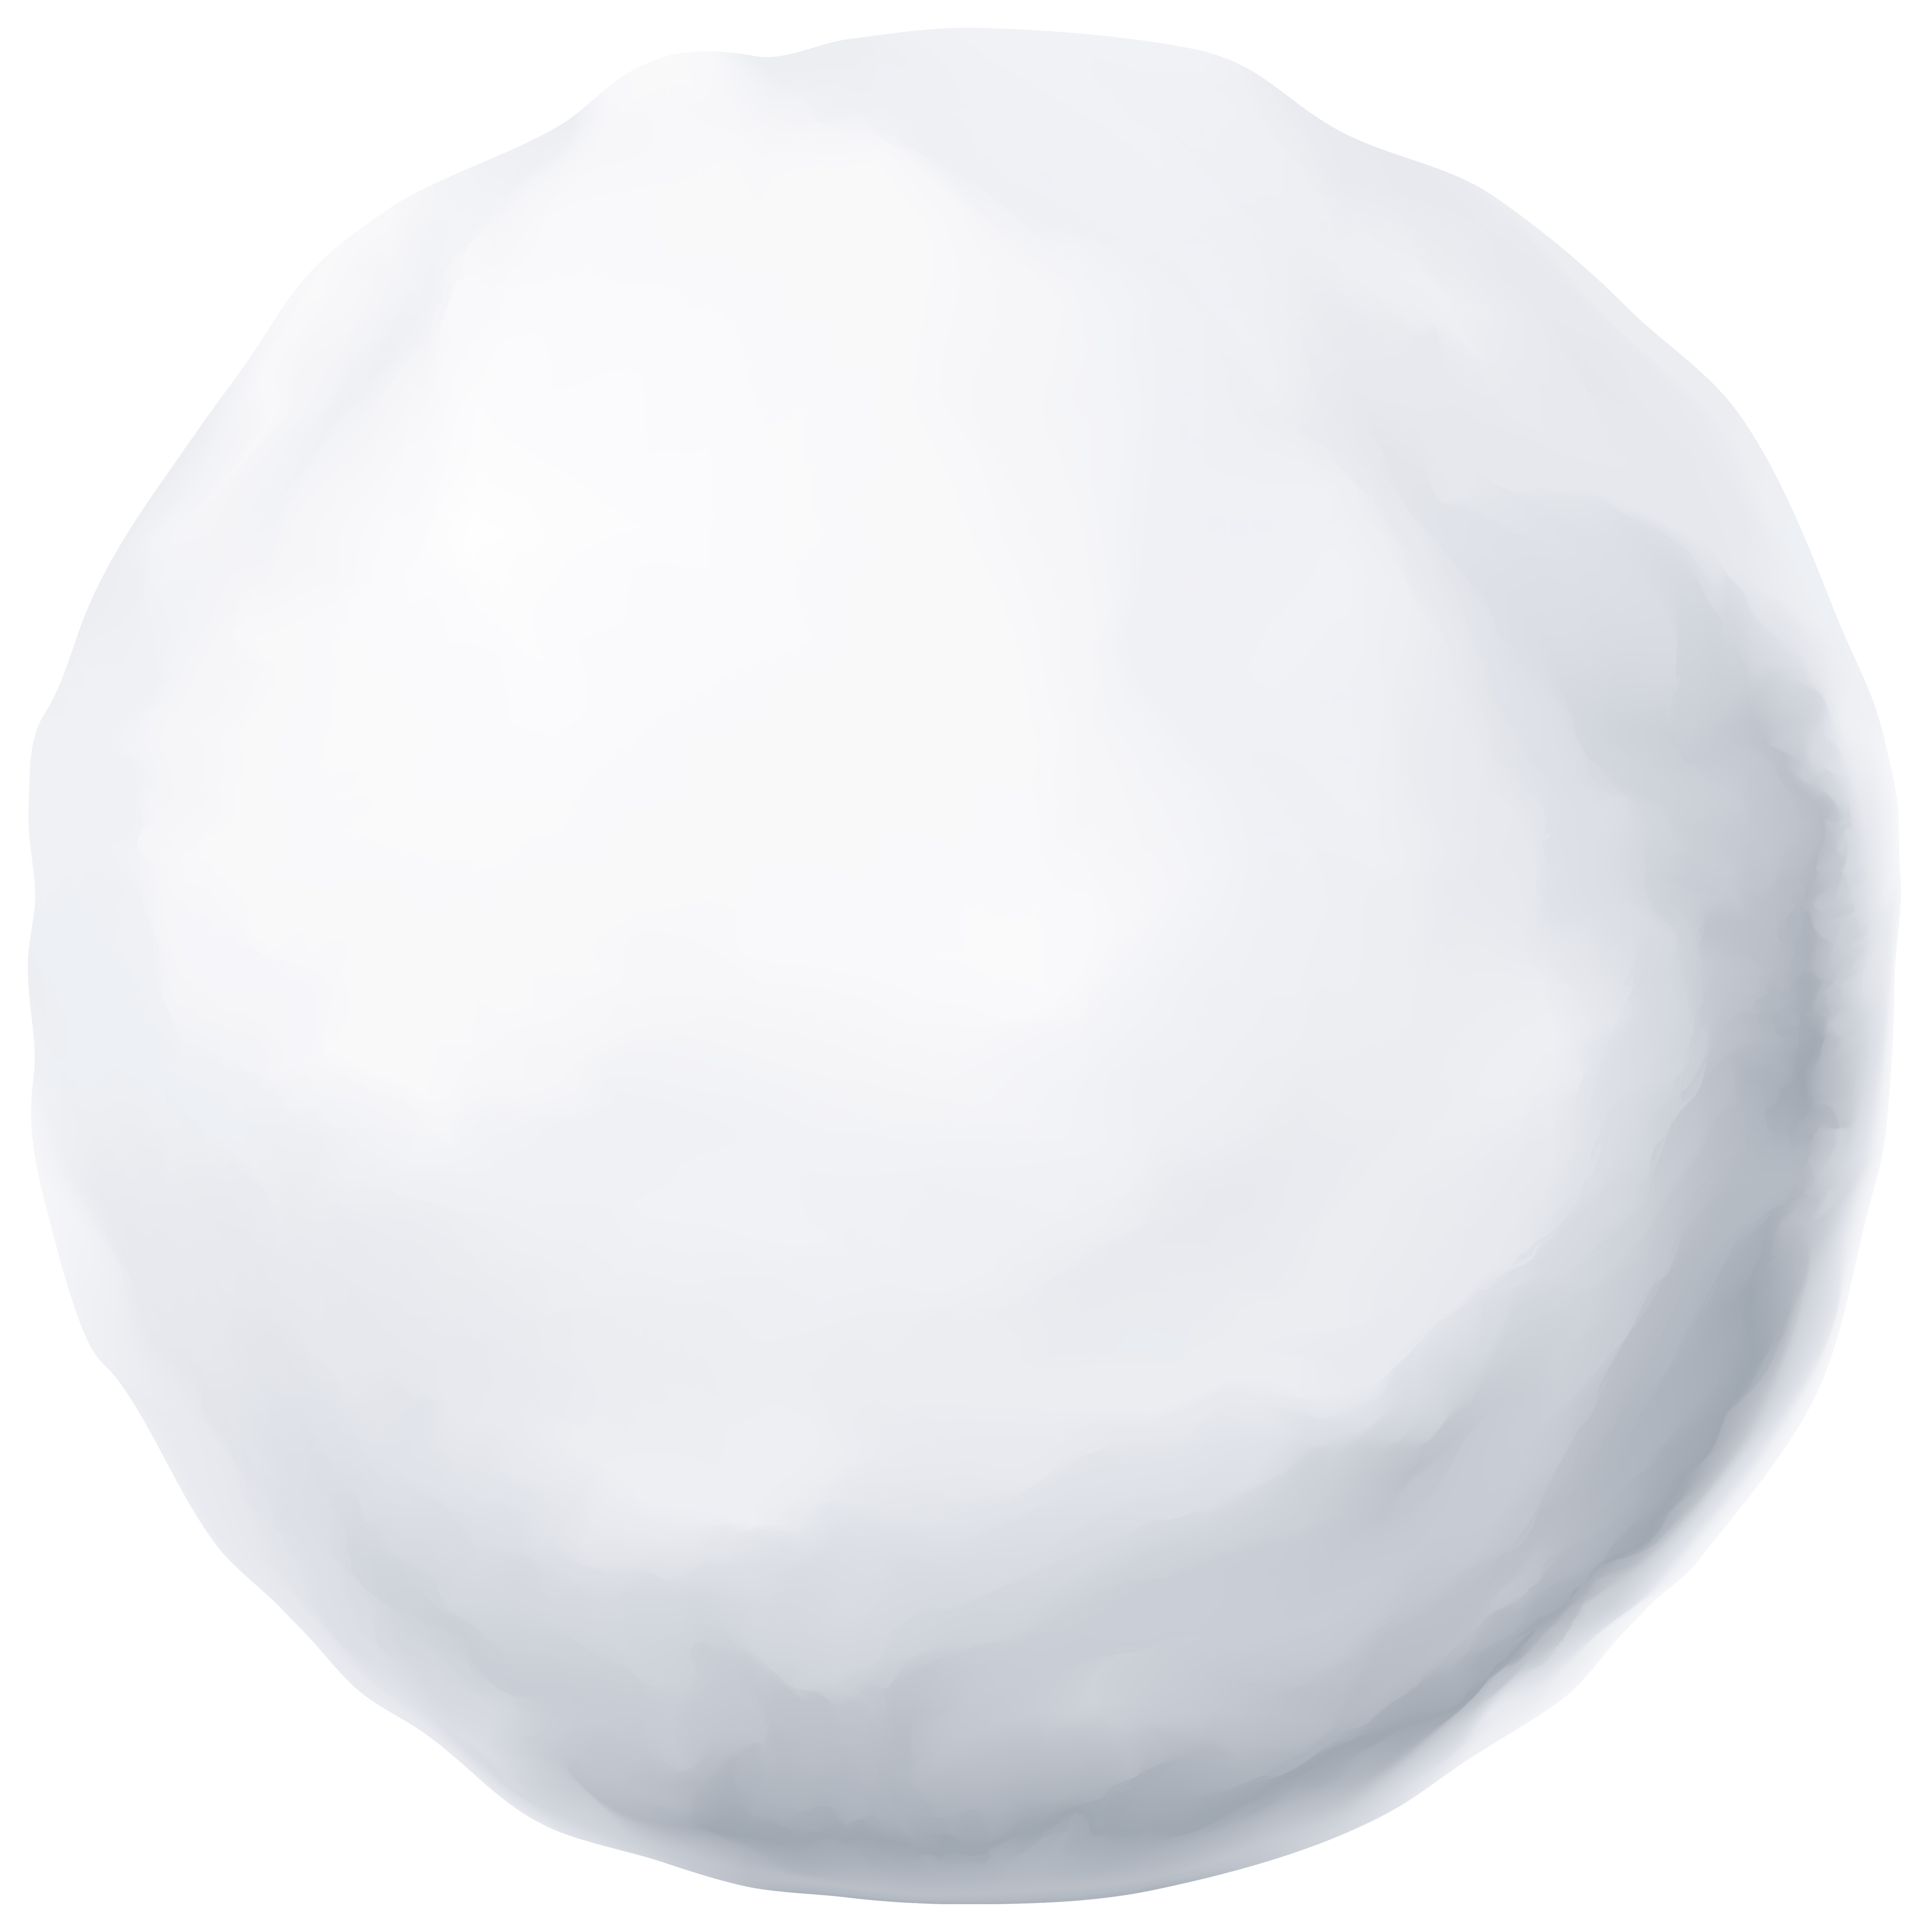 Download PNG image - Snowball PNG Image 